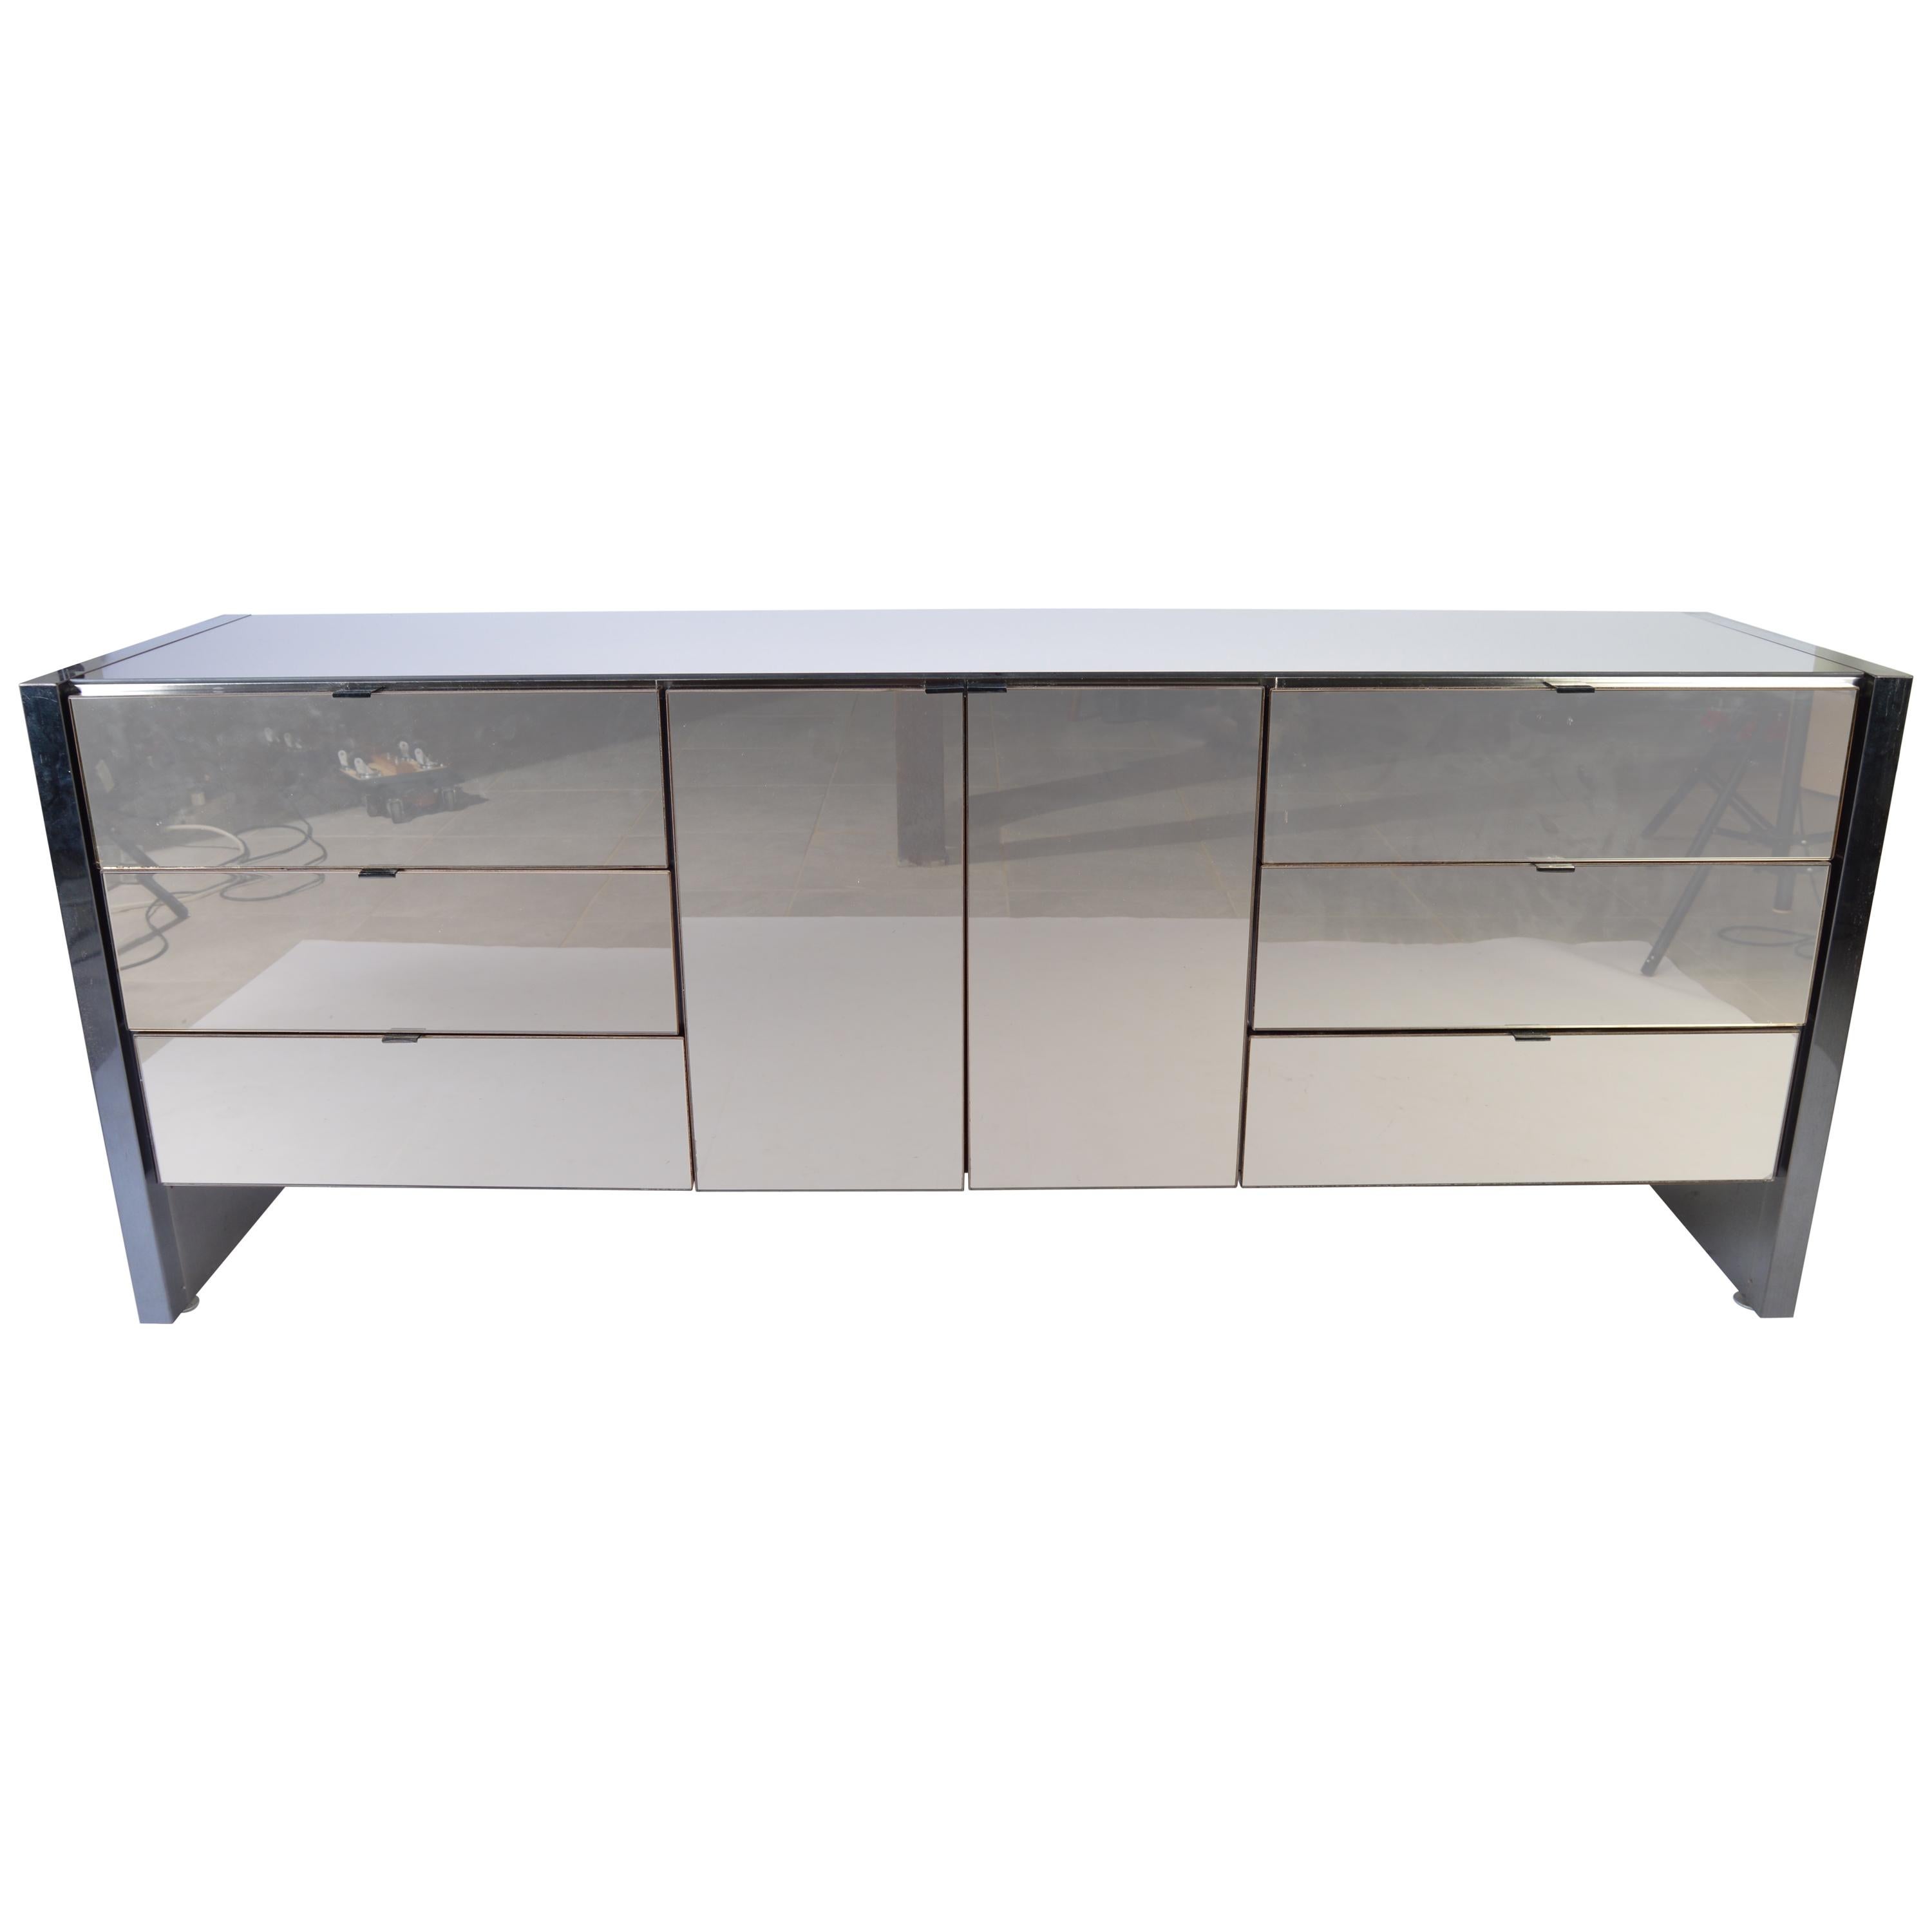 Ello Furniture Smoked Mirror and Chromed Steel Credenza